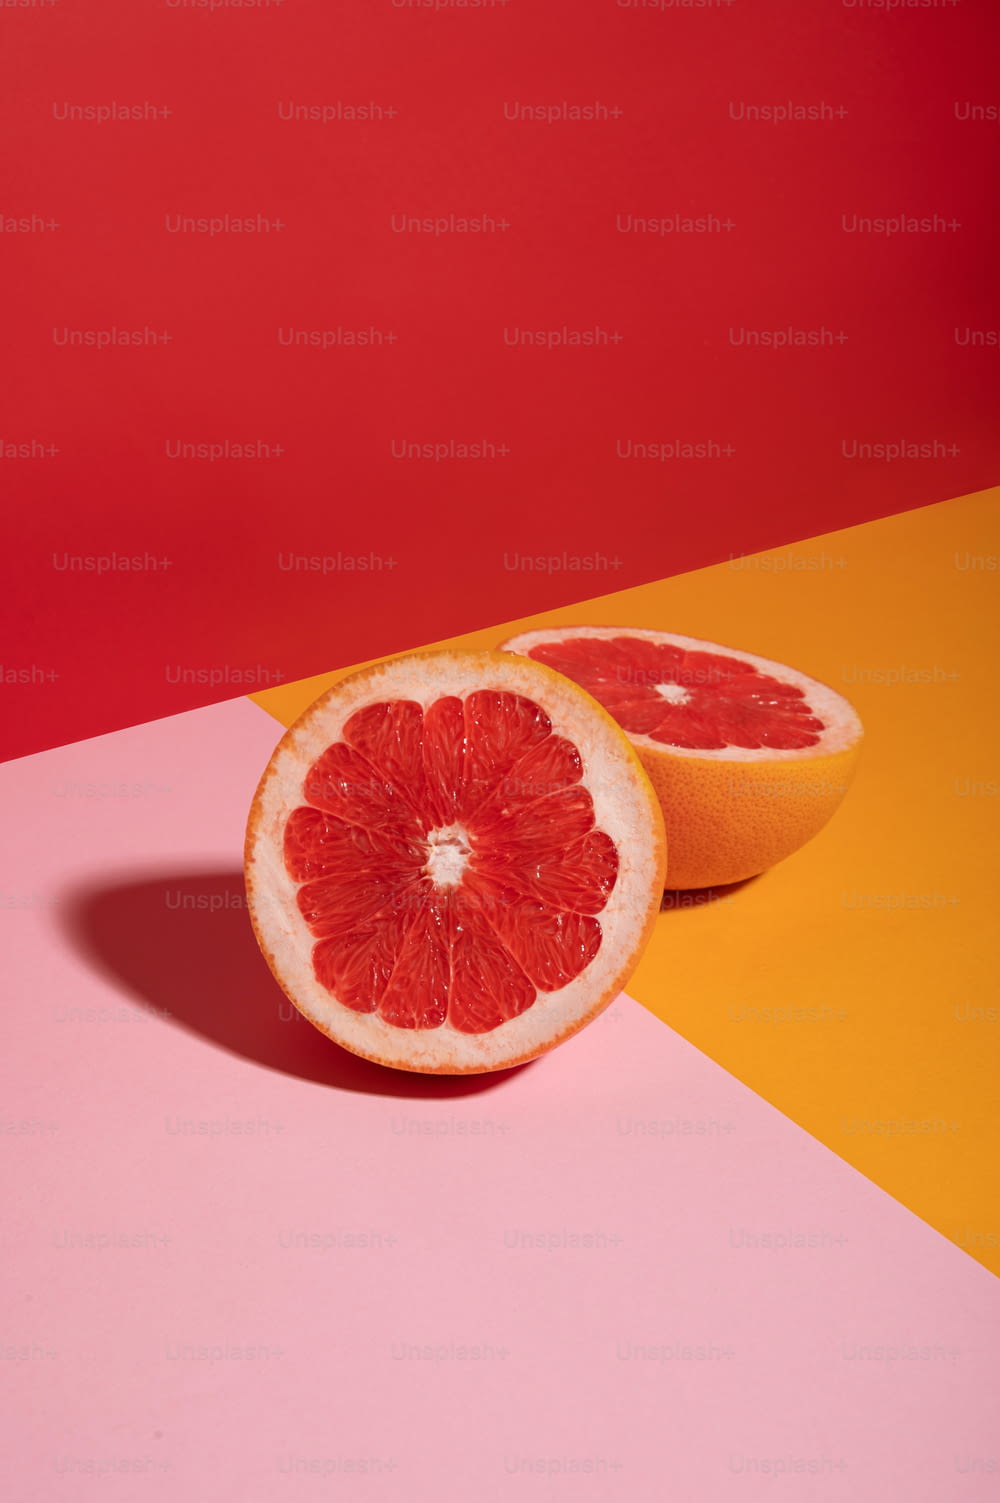 a grapefruit cut in half on a pink and yellow background